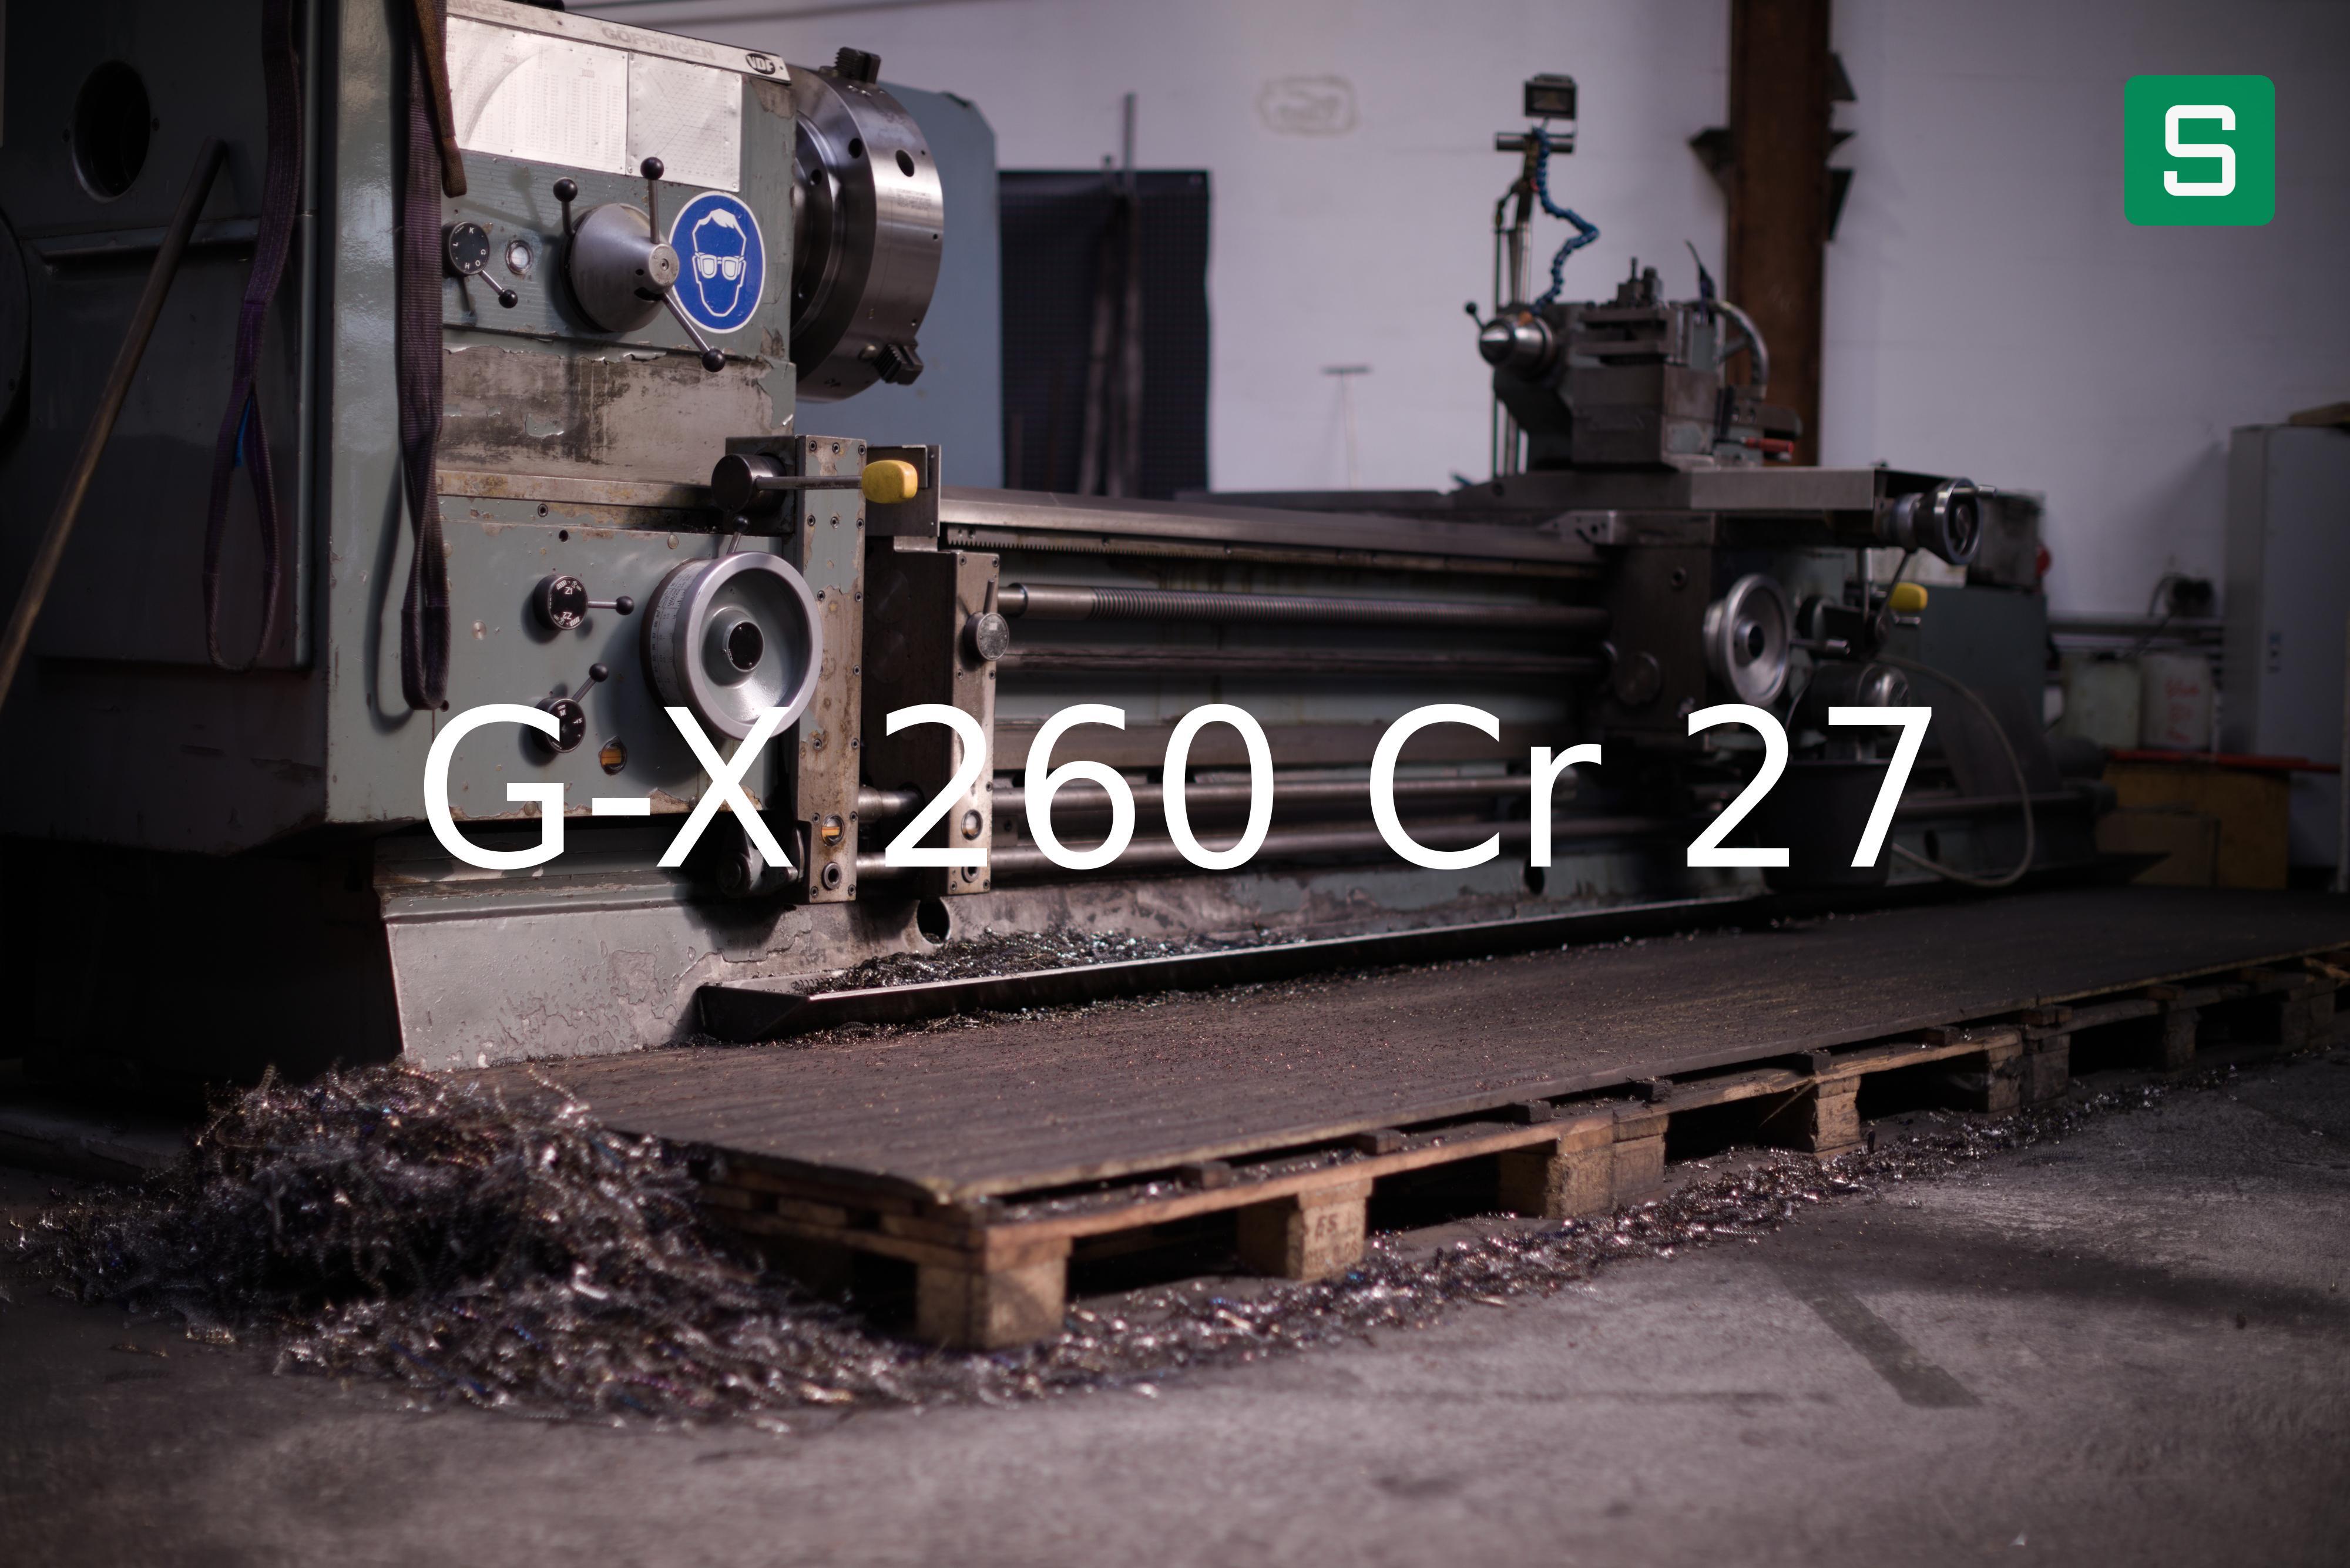 Steel Material: G-X 260 Cr 27